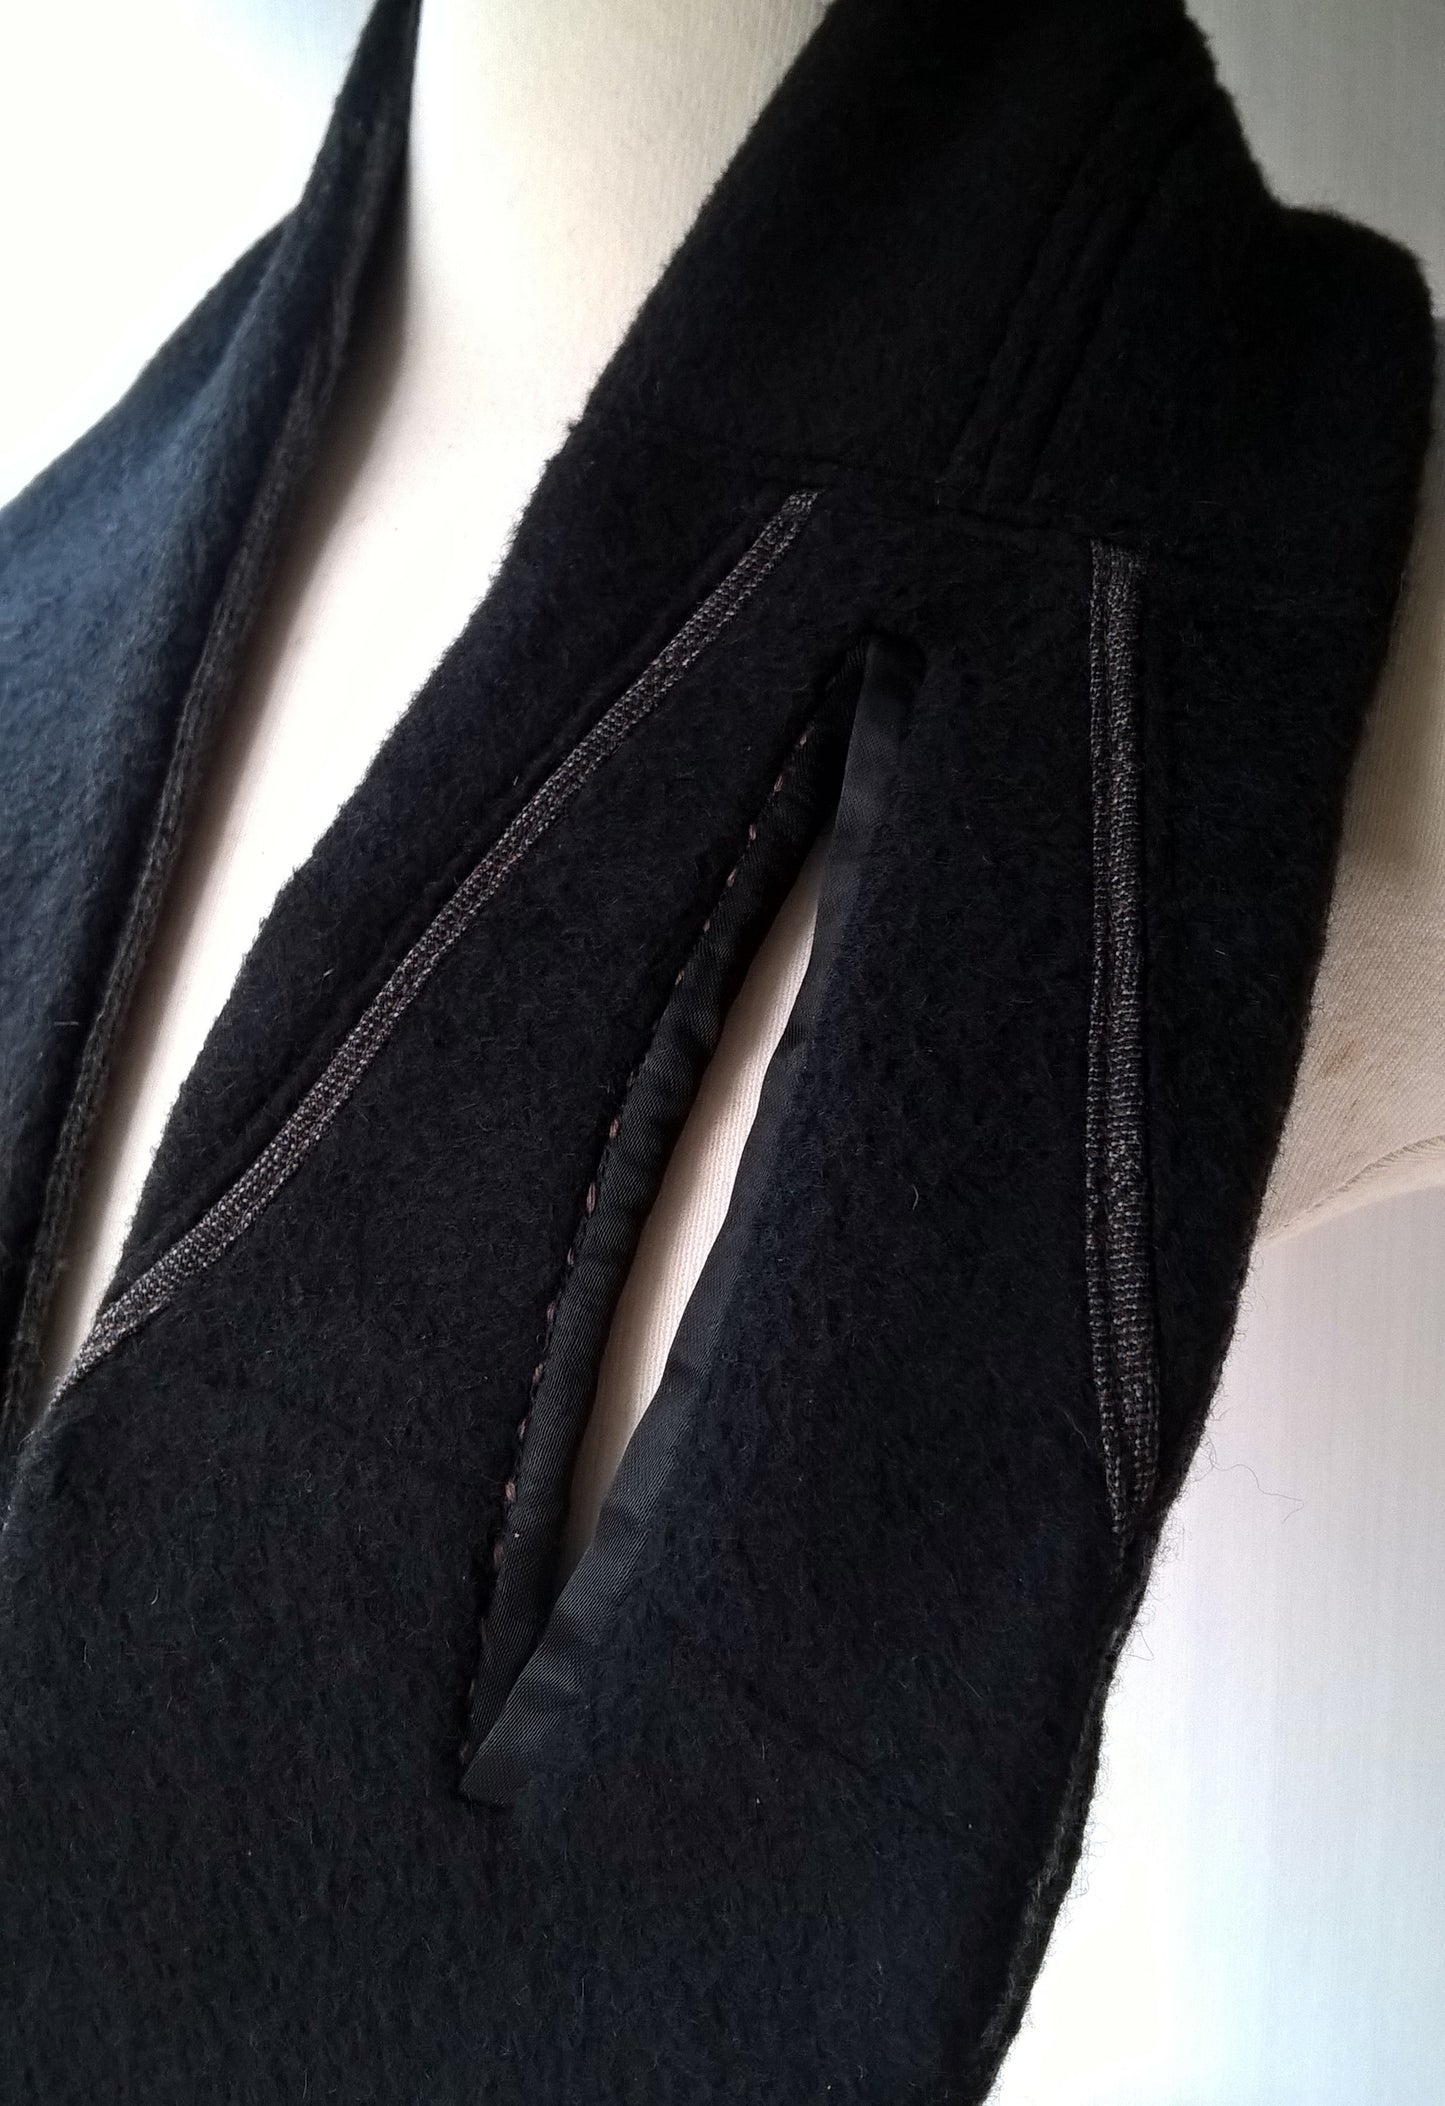 Black cashmere keyhole scarf with grey knitted lining